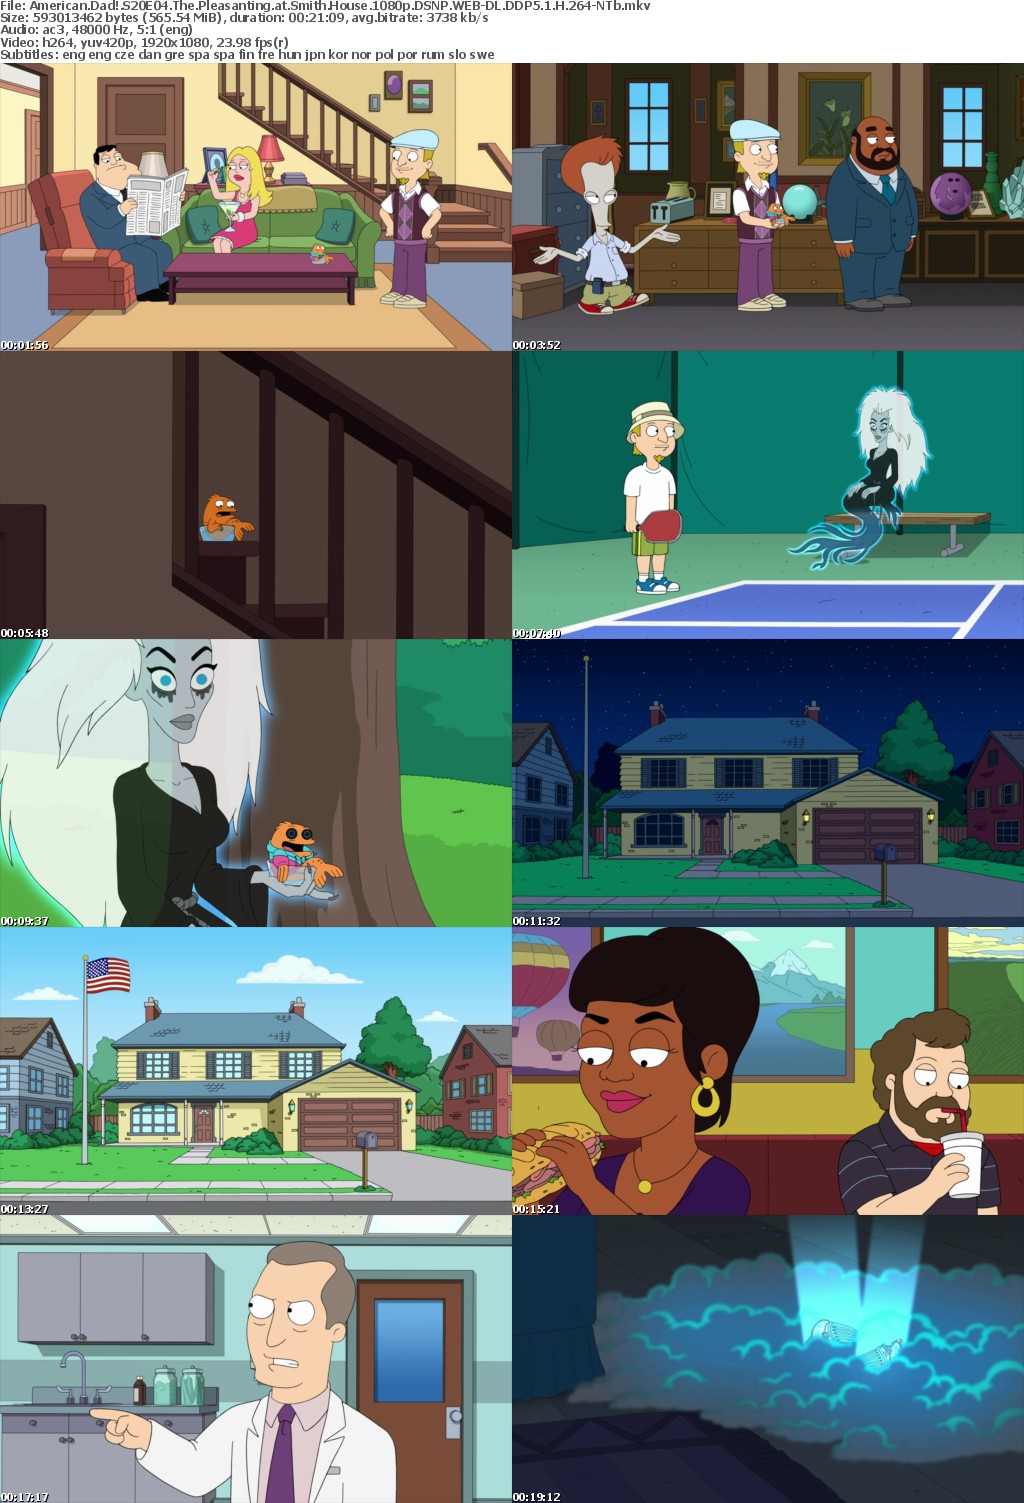 American Dad! S20E04 The Pleasanting at Smith House 1080p DSNP WEB-DL DDP5 1 H 264-NTb